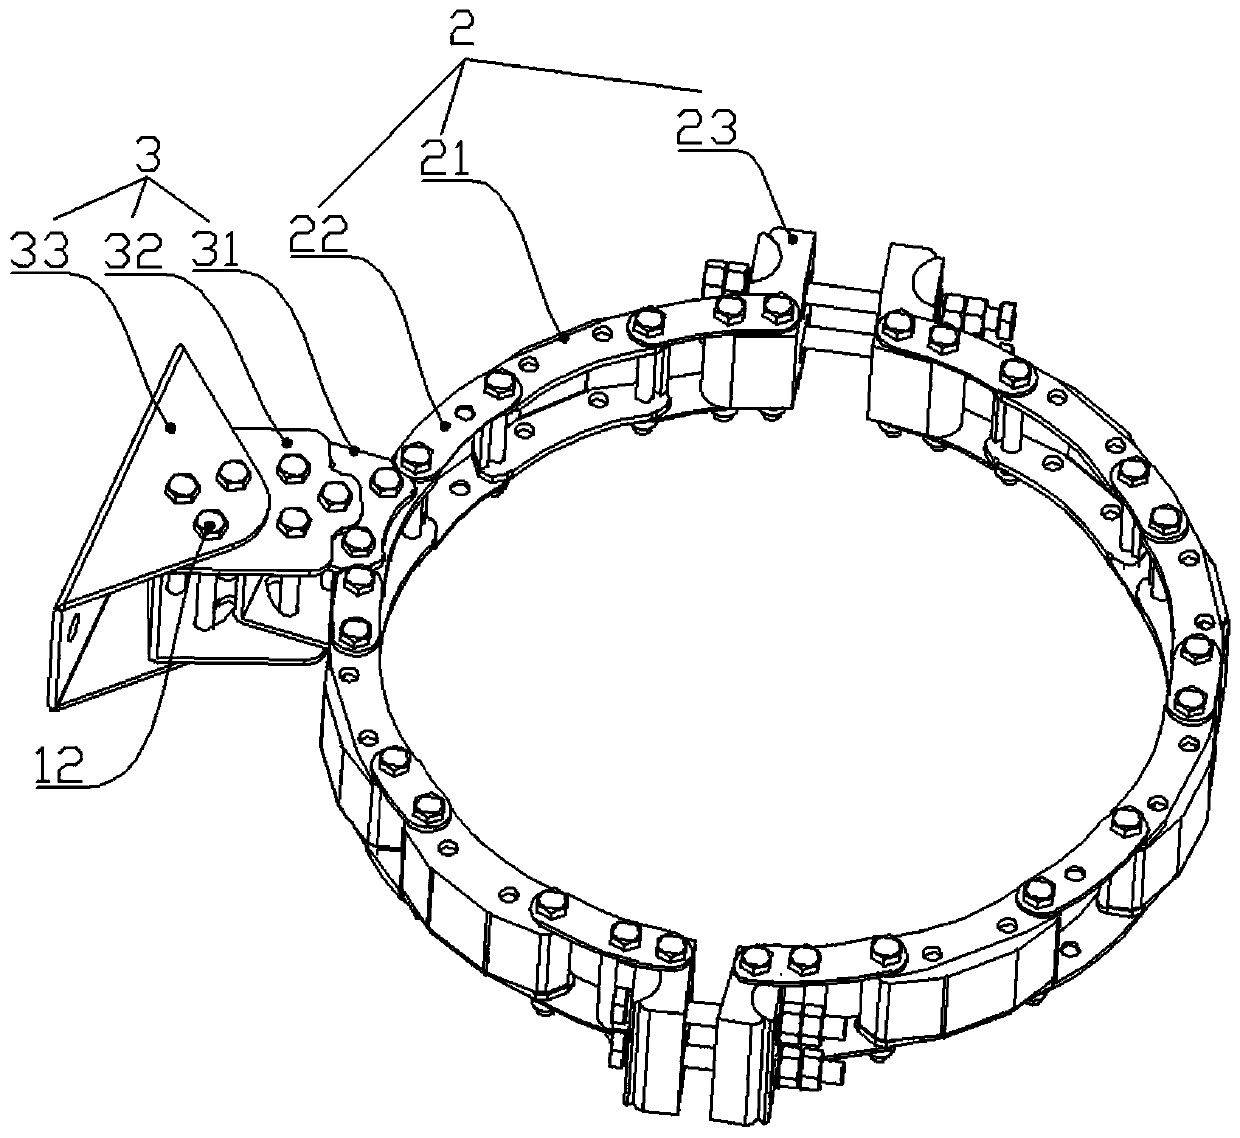 Communication hoop of adjustable rotating supporting arm